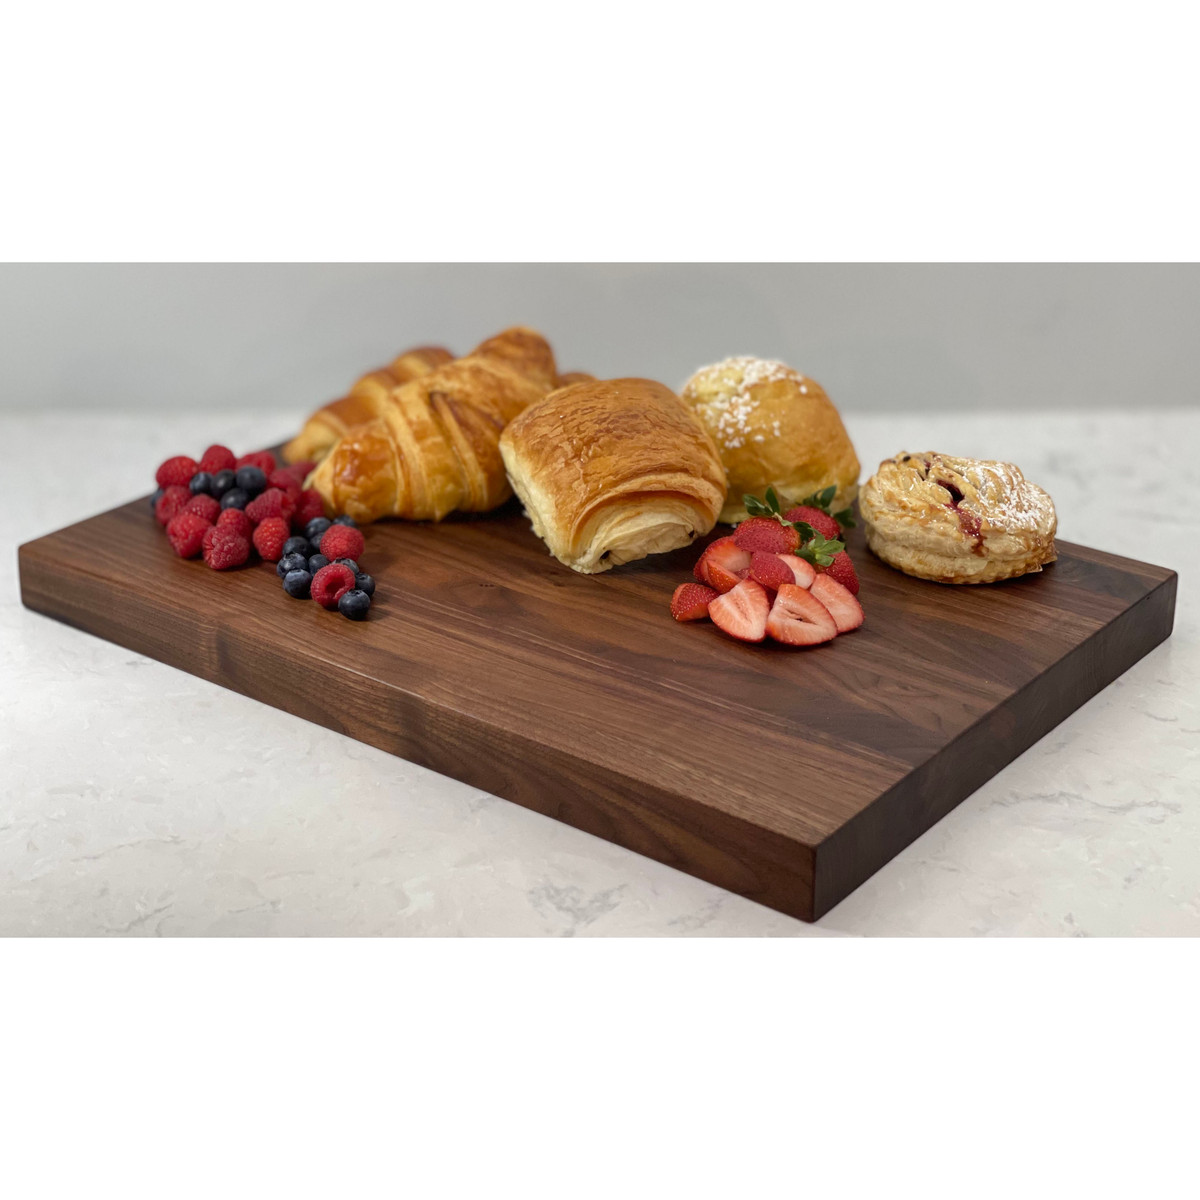 Black Walnut Butcher Block Cutting Board with Invisible Inner